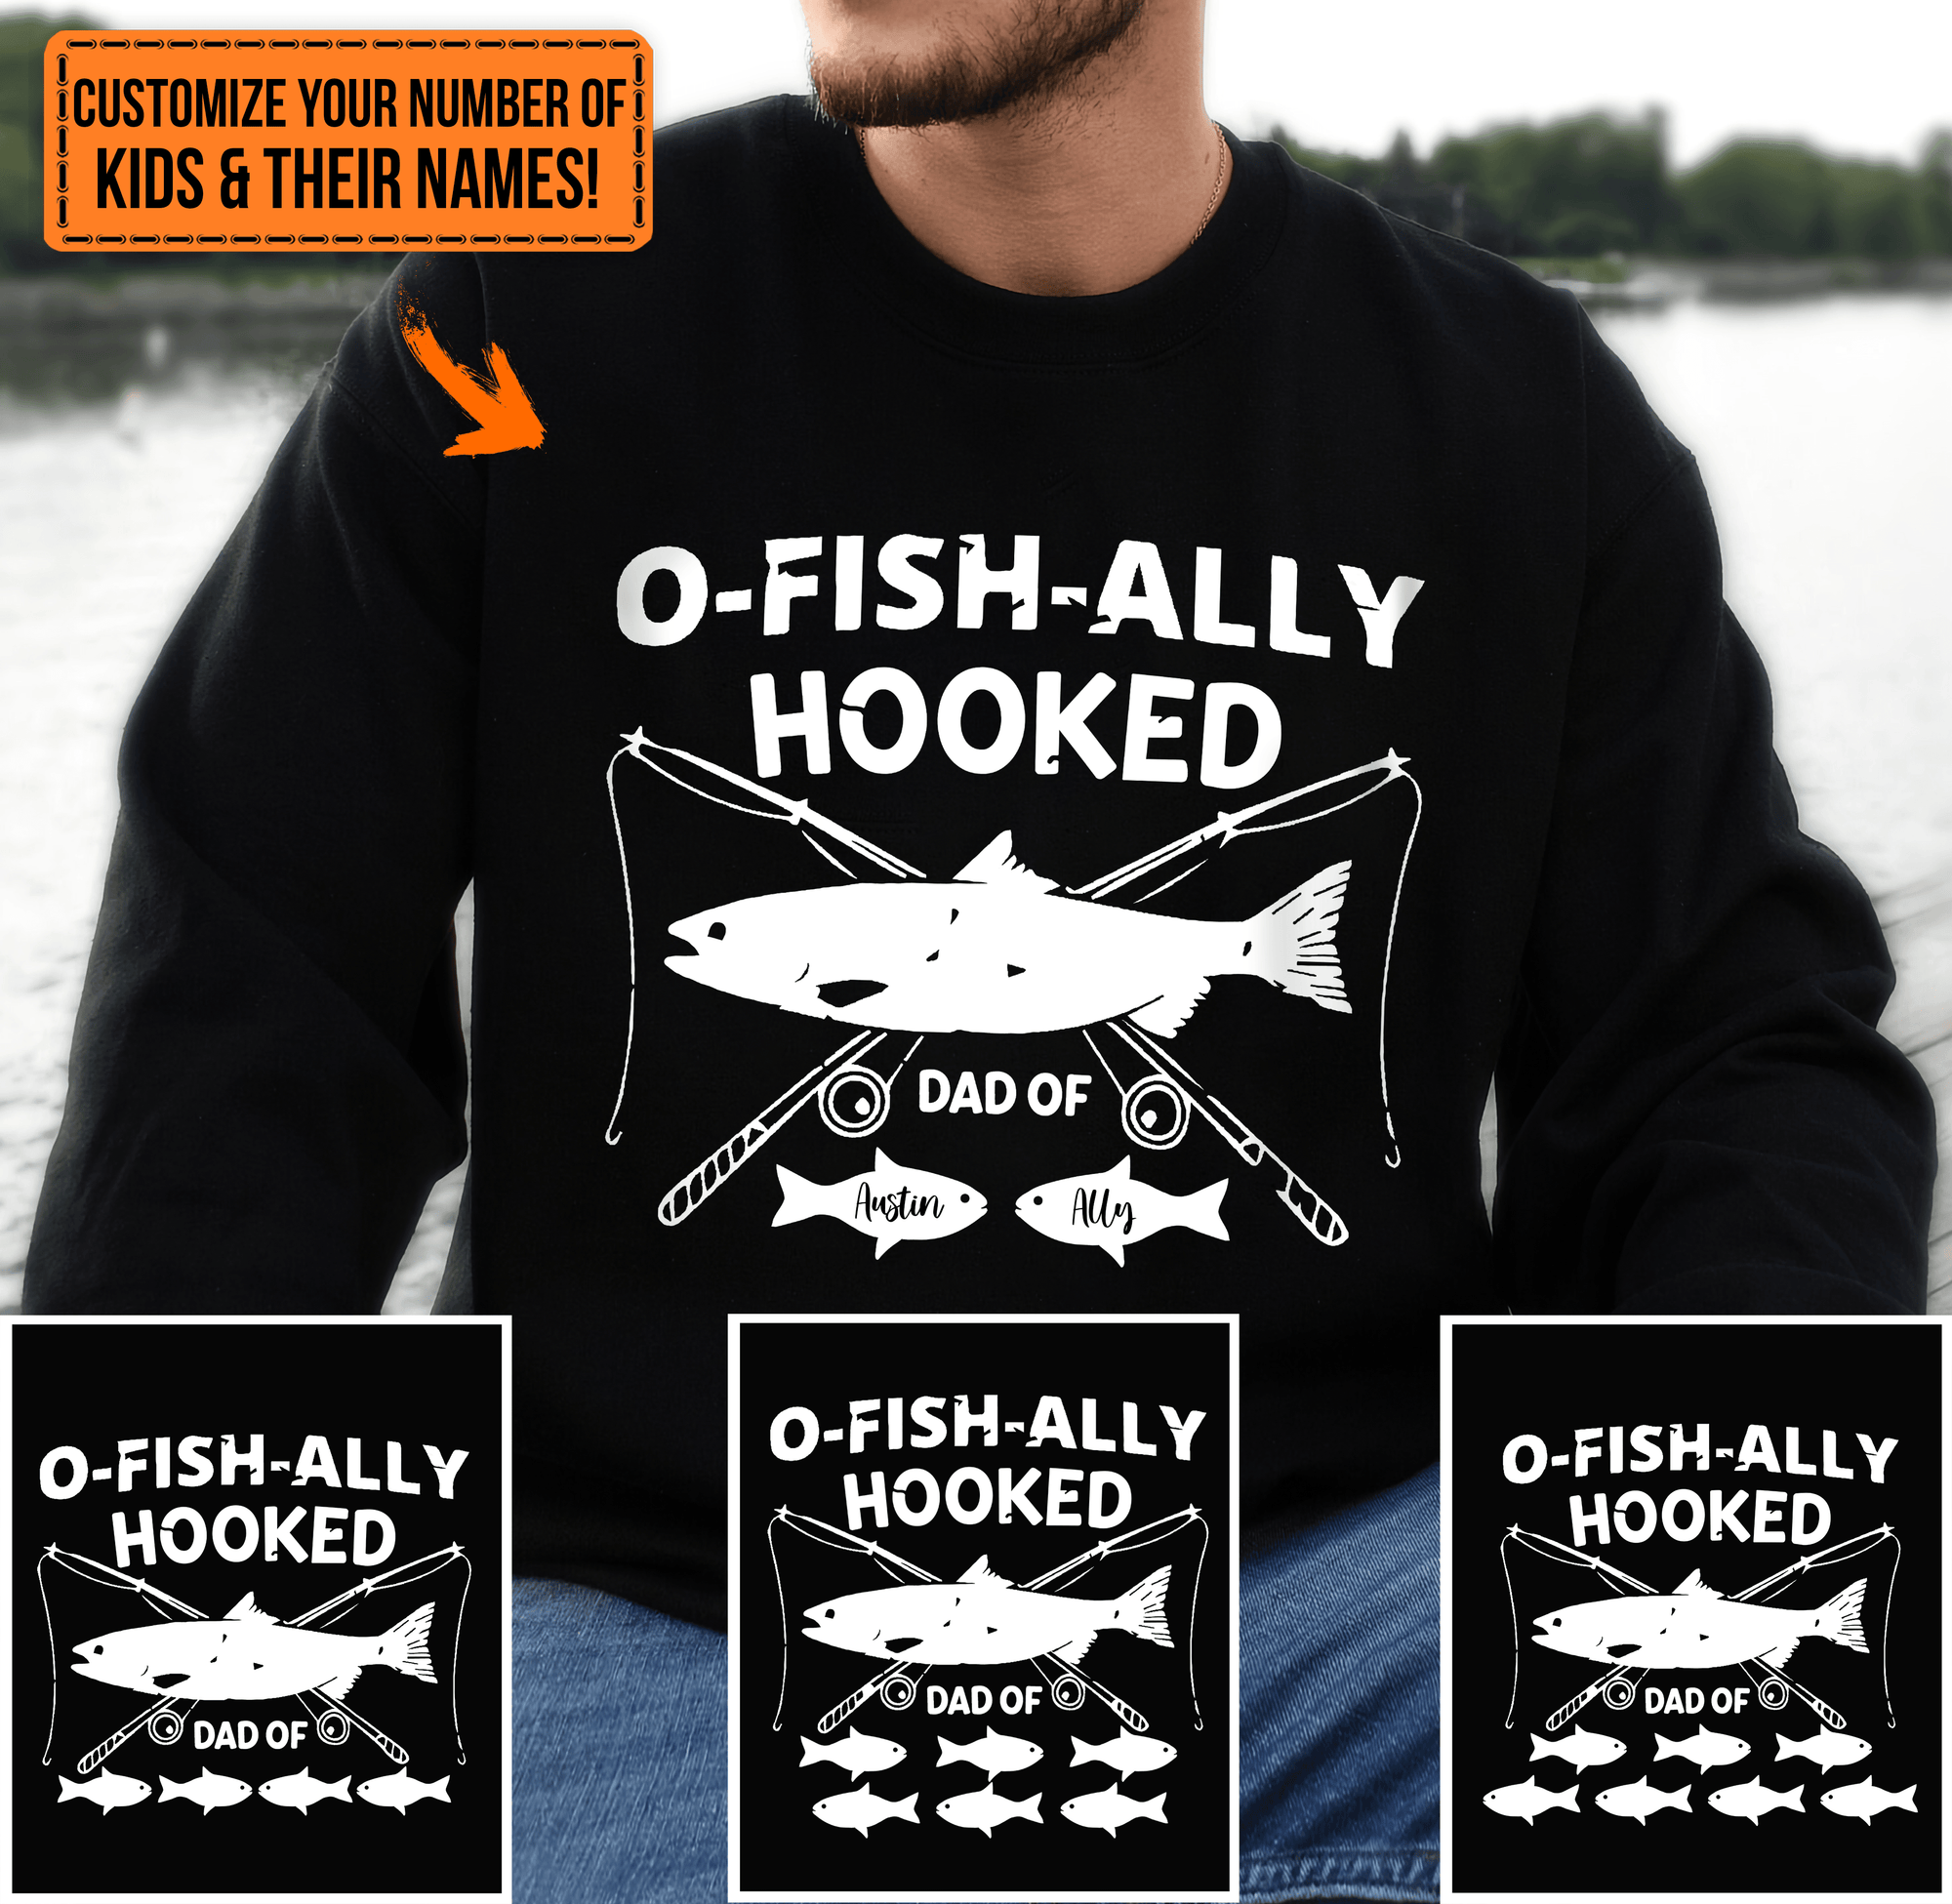 O-Fish-Ally Hooked Fishing Pun - Funny Fathers Day Personalized Custom T Shirt - Birthday, Loving, Funny Gift for Grandfather/Dad/Father, Husband, Grandparent - Suzitee Store